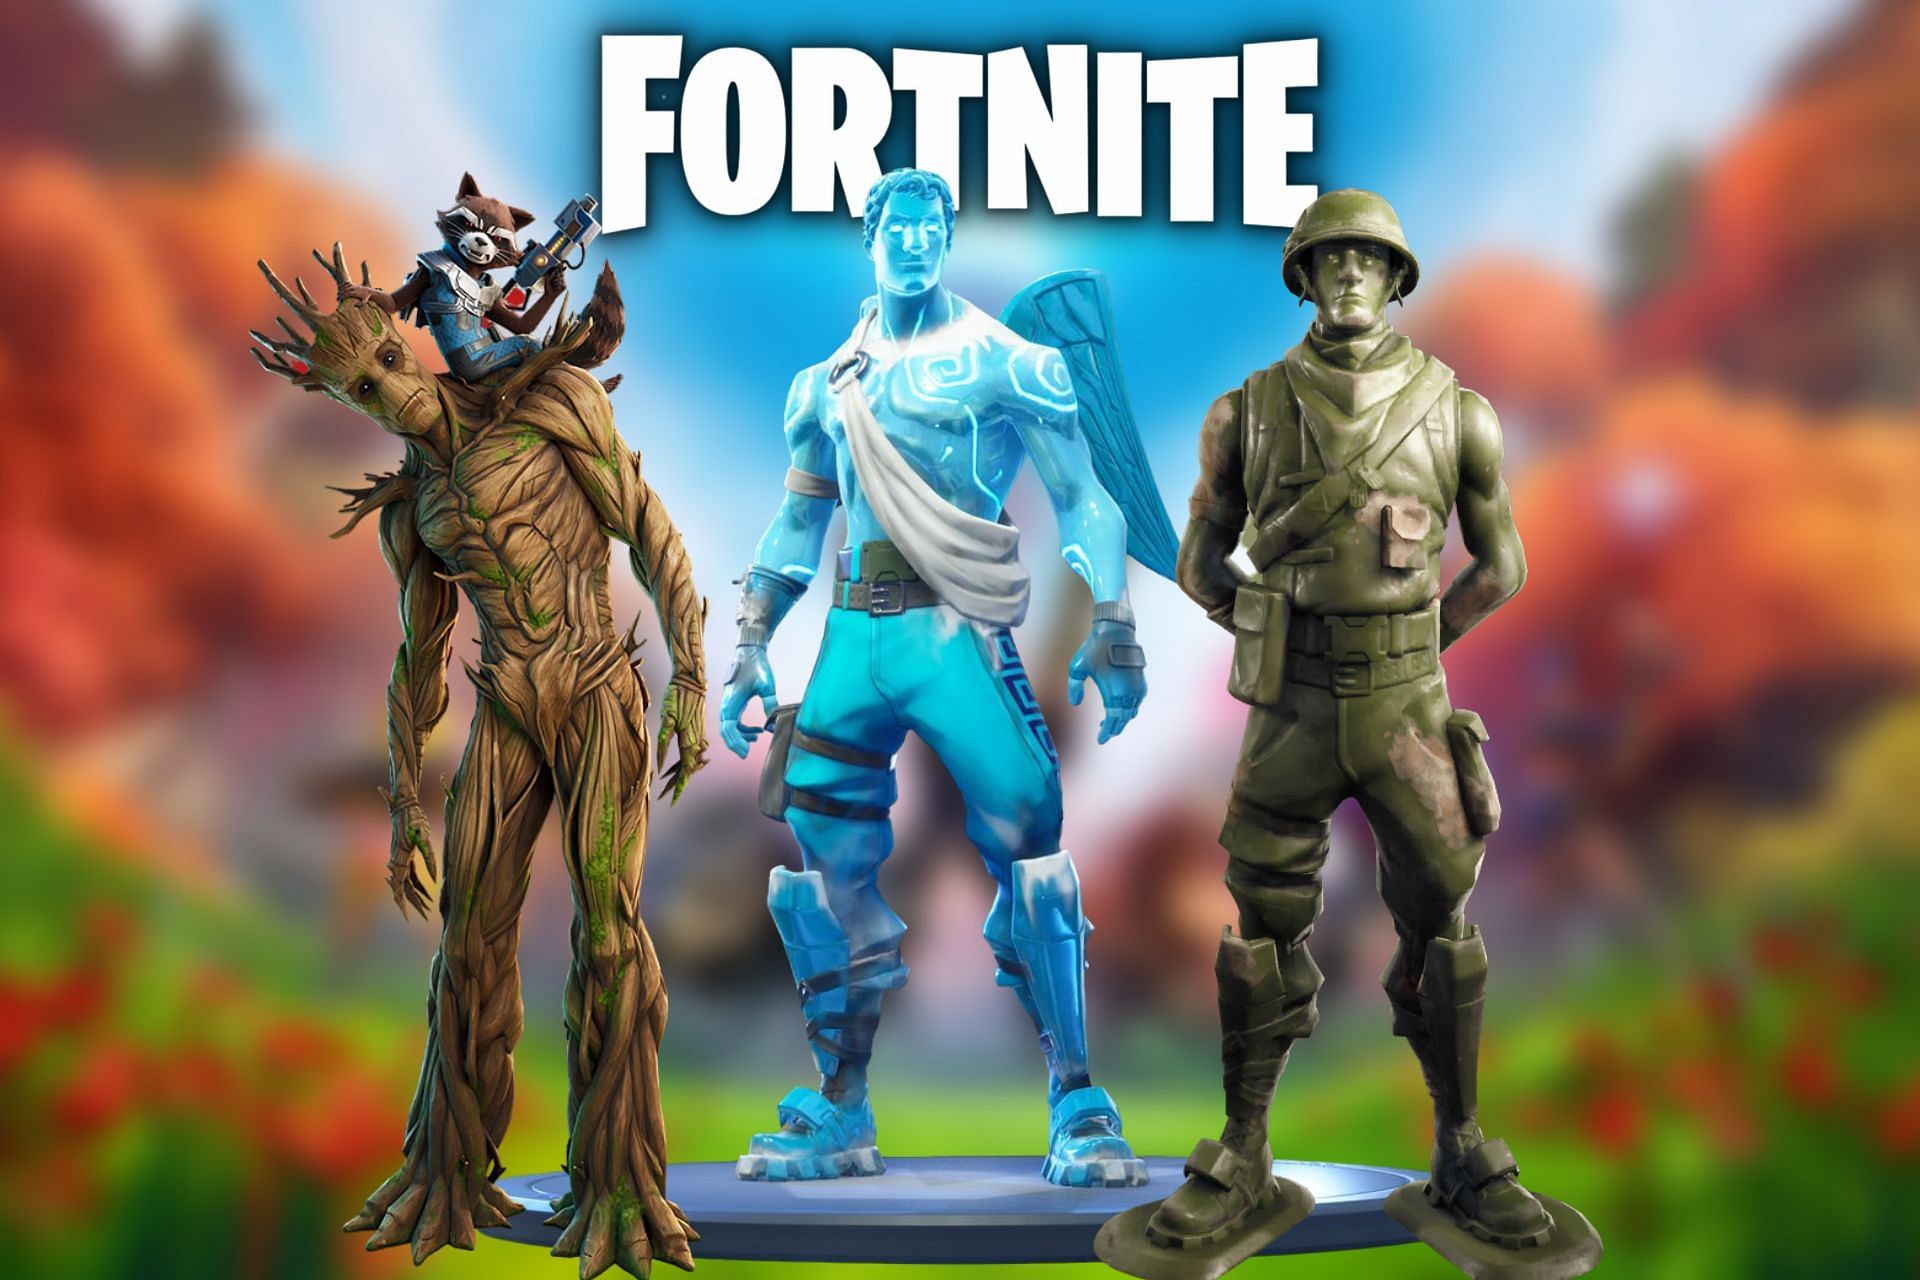 Pay to win skins in Fortnite (Image via Epic Games)